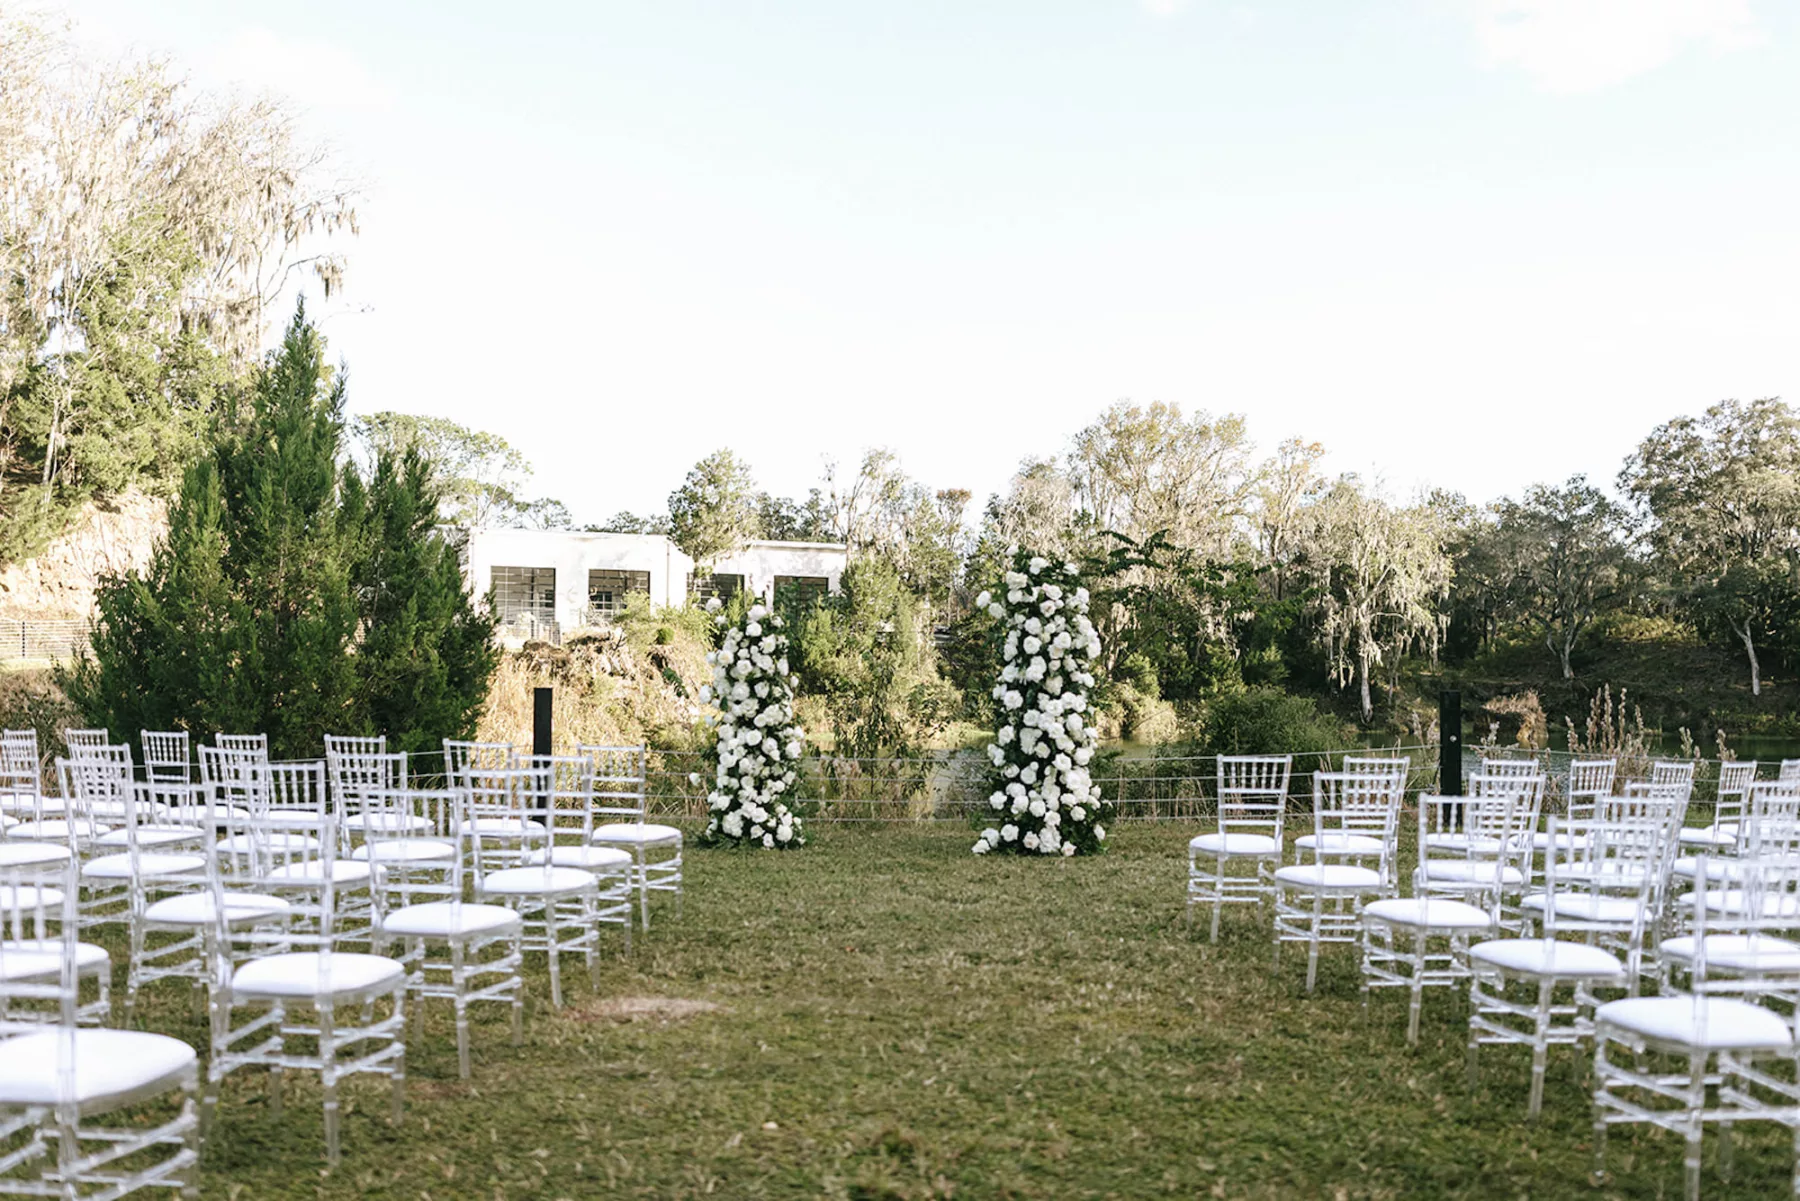 Asymmetrical Floral Arbor with White Roses and Greenery Inspiration | Chiavari Ghost Chairs for Modern Outdoor Wedding Ceremony | Tampa Bay Florist Bloom Shakalaka